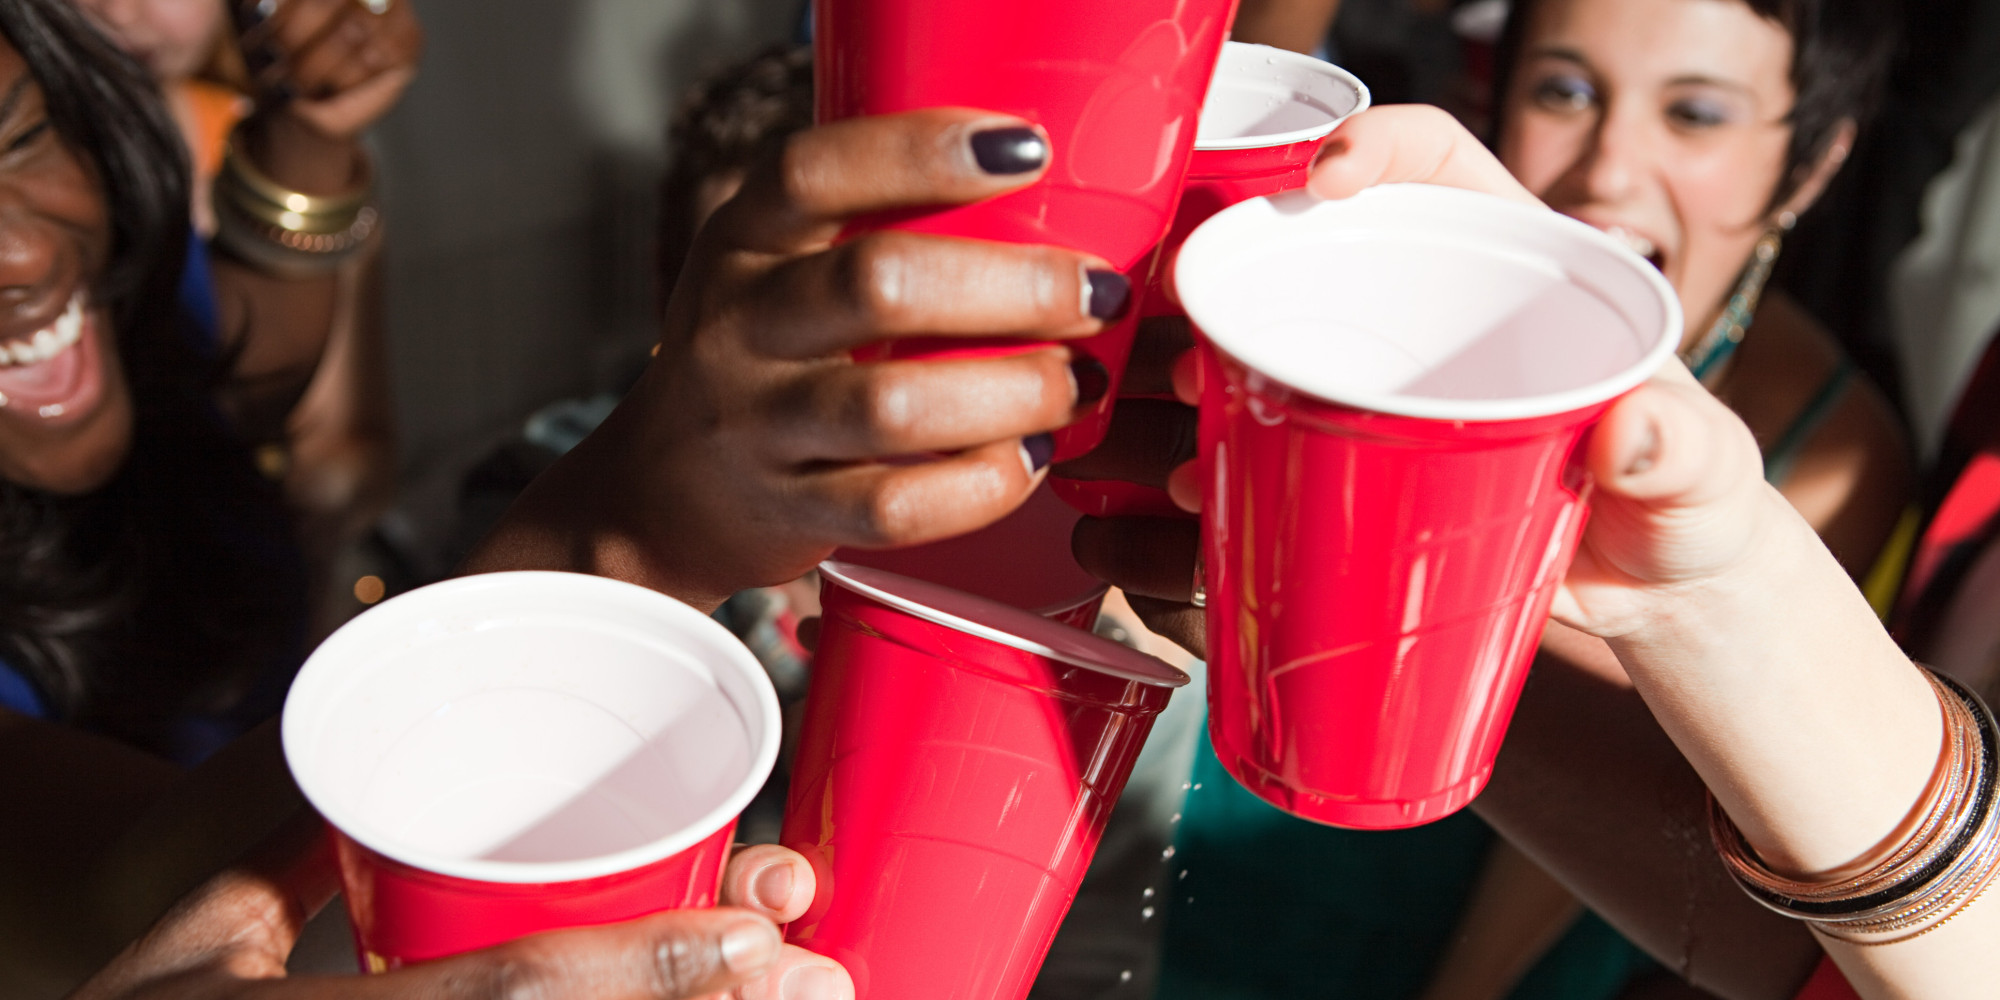 Young people with plastic cups at party